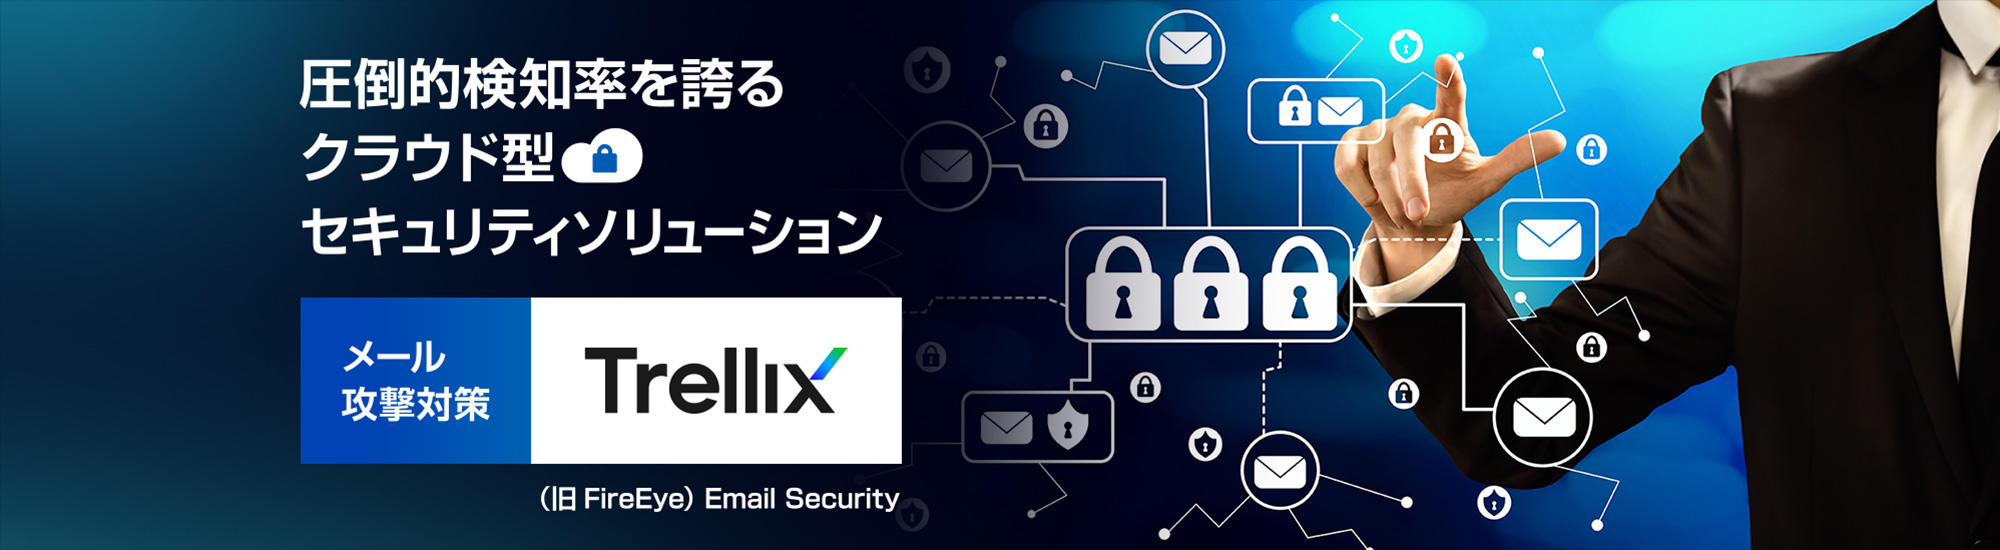 "Trellix (former FireEye) Email Security" for targeted email attack countermeasures